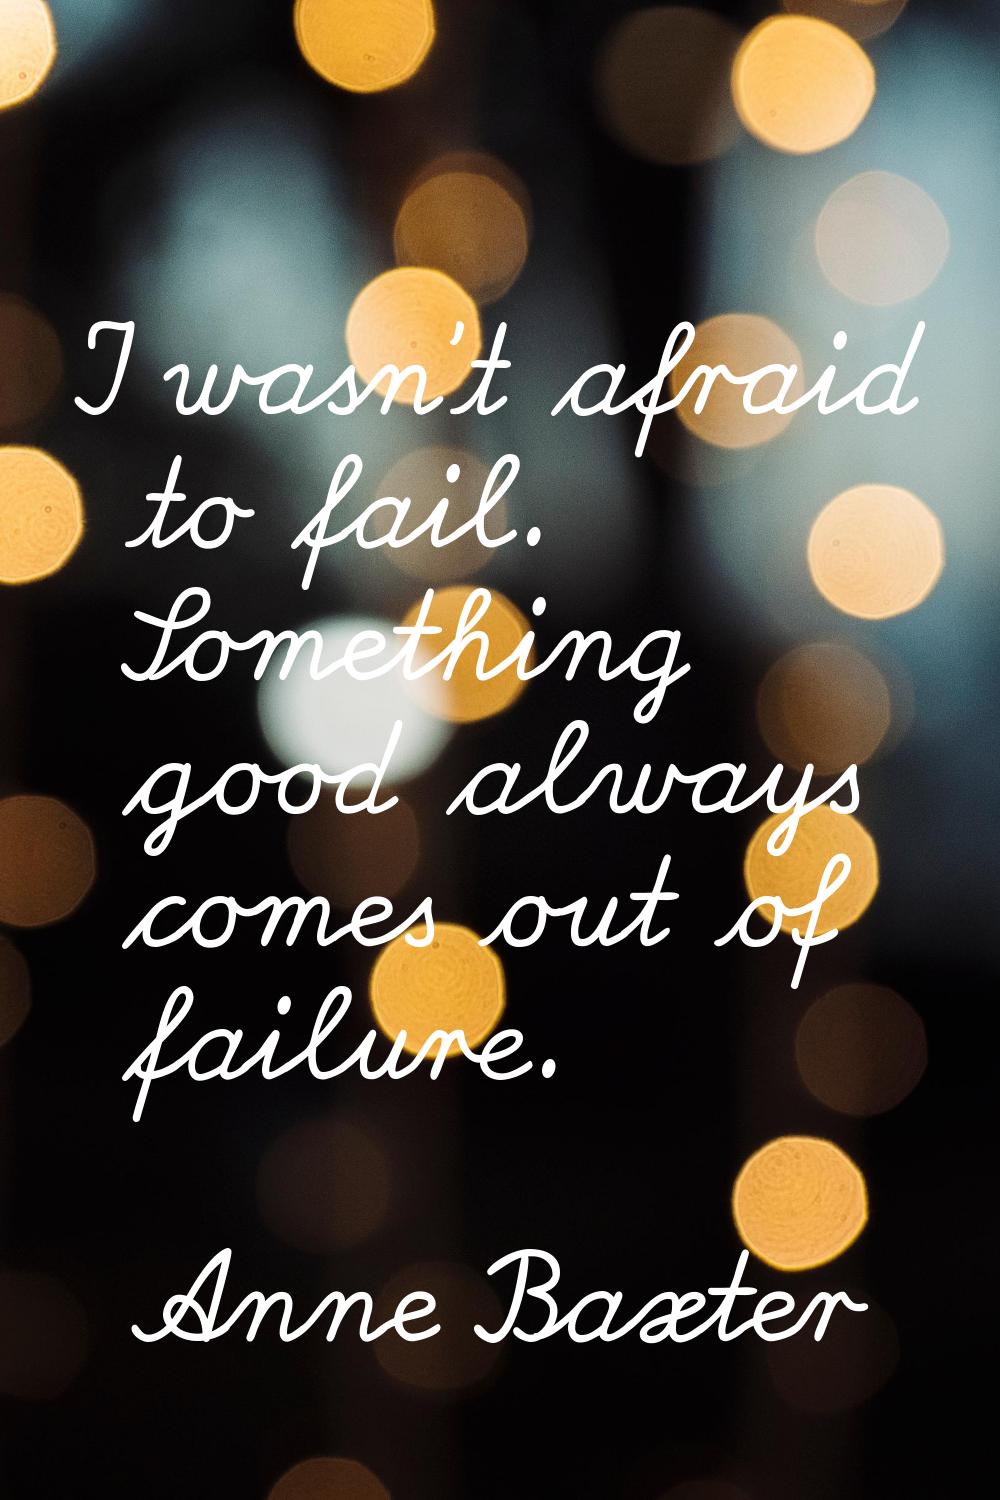 I wasn't afraid to fail. Something good always comes out of failure.